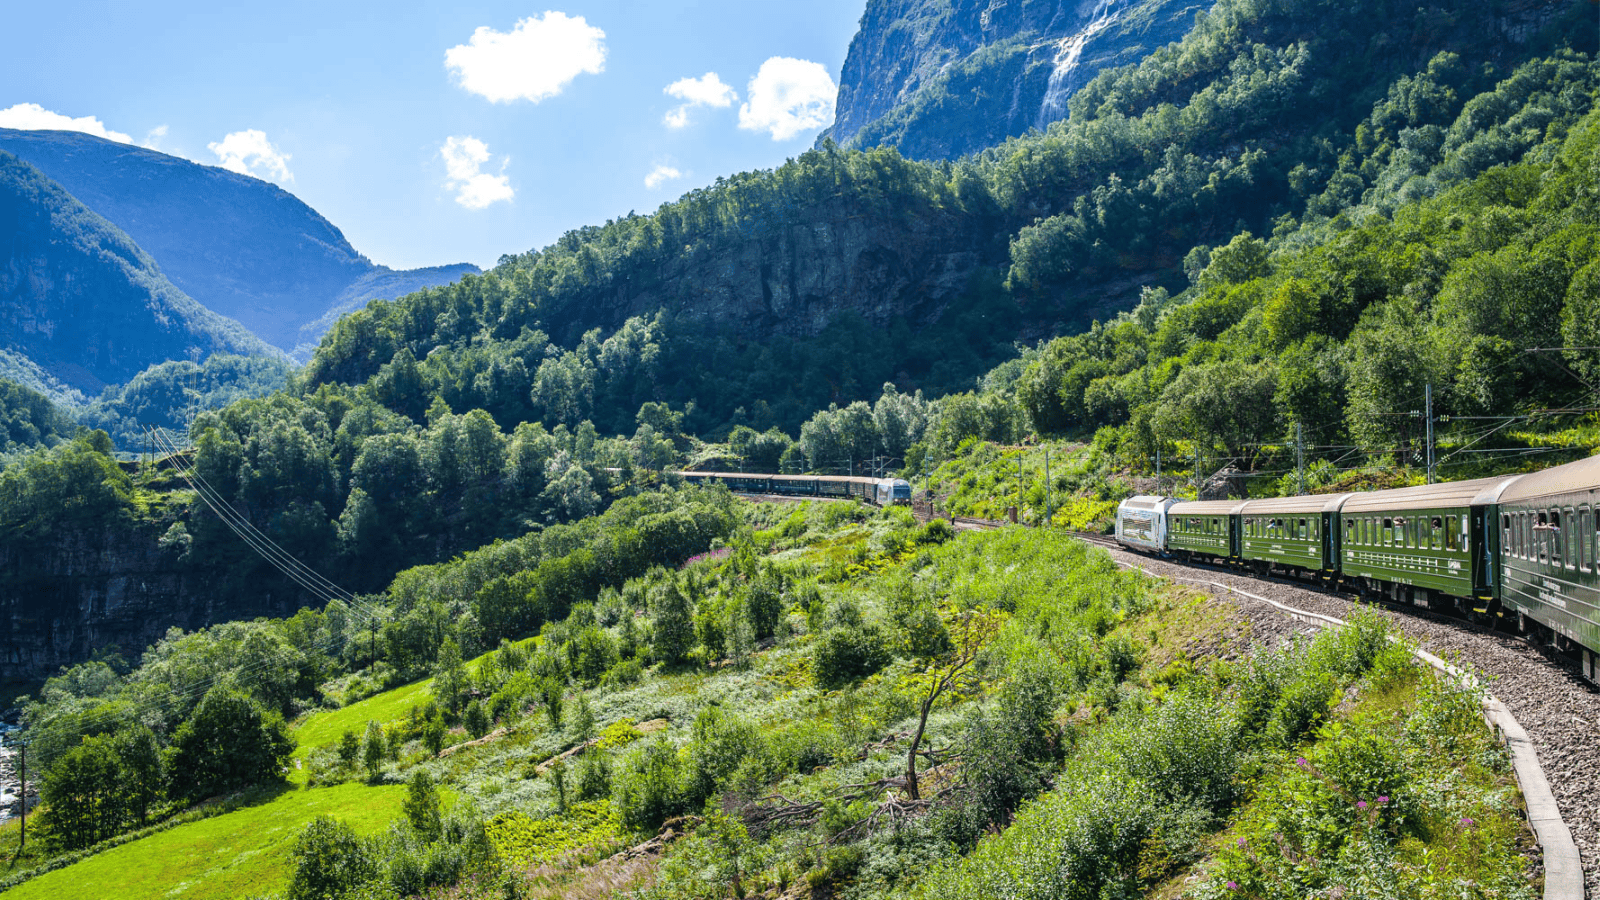 <p>Embark on a Nordic adventure with Norway’s legendary <a href="https://www.visitnorway.com/listings/the-fl%C3%A5m-railway/4202/" rel="nofollow external noopener noreferrer">Flåm Railway</a>. The Flåm is a top tourist attraction to experience the picturesque Norwegian countryside. It begins at sea level and ascends into the mountains on a one-hour ride.</p><p>Along the Flåm route, you’ll see lush valleys and towering waterfalls. The train passes through 20 tunnels and several charming towns. Views from the Flåm Railway are breathtaking regardless of the time of year you ride.</p>